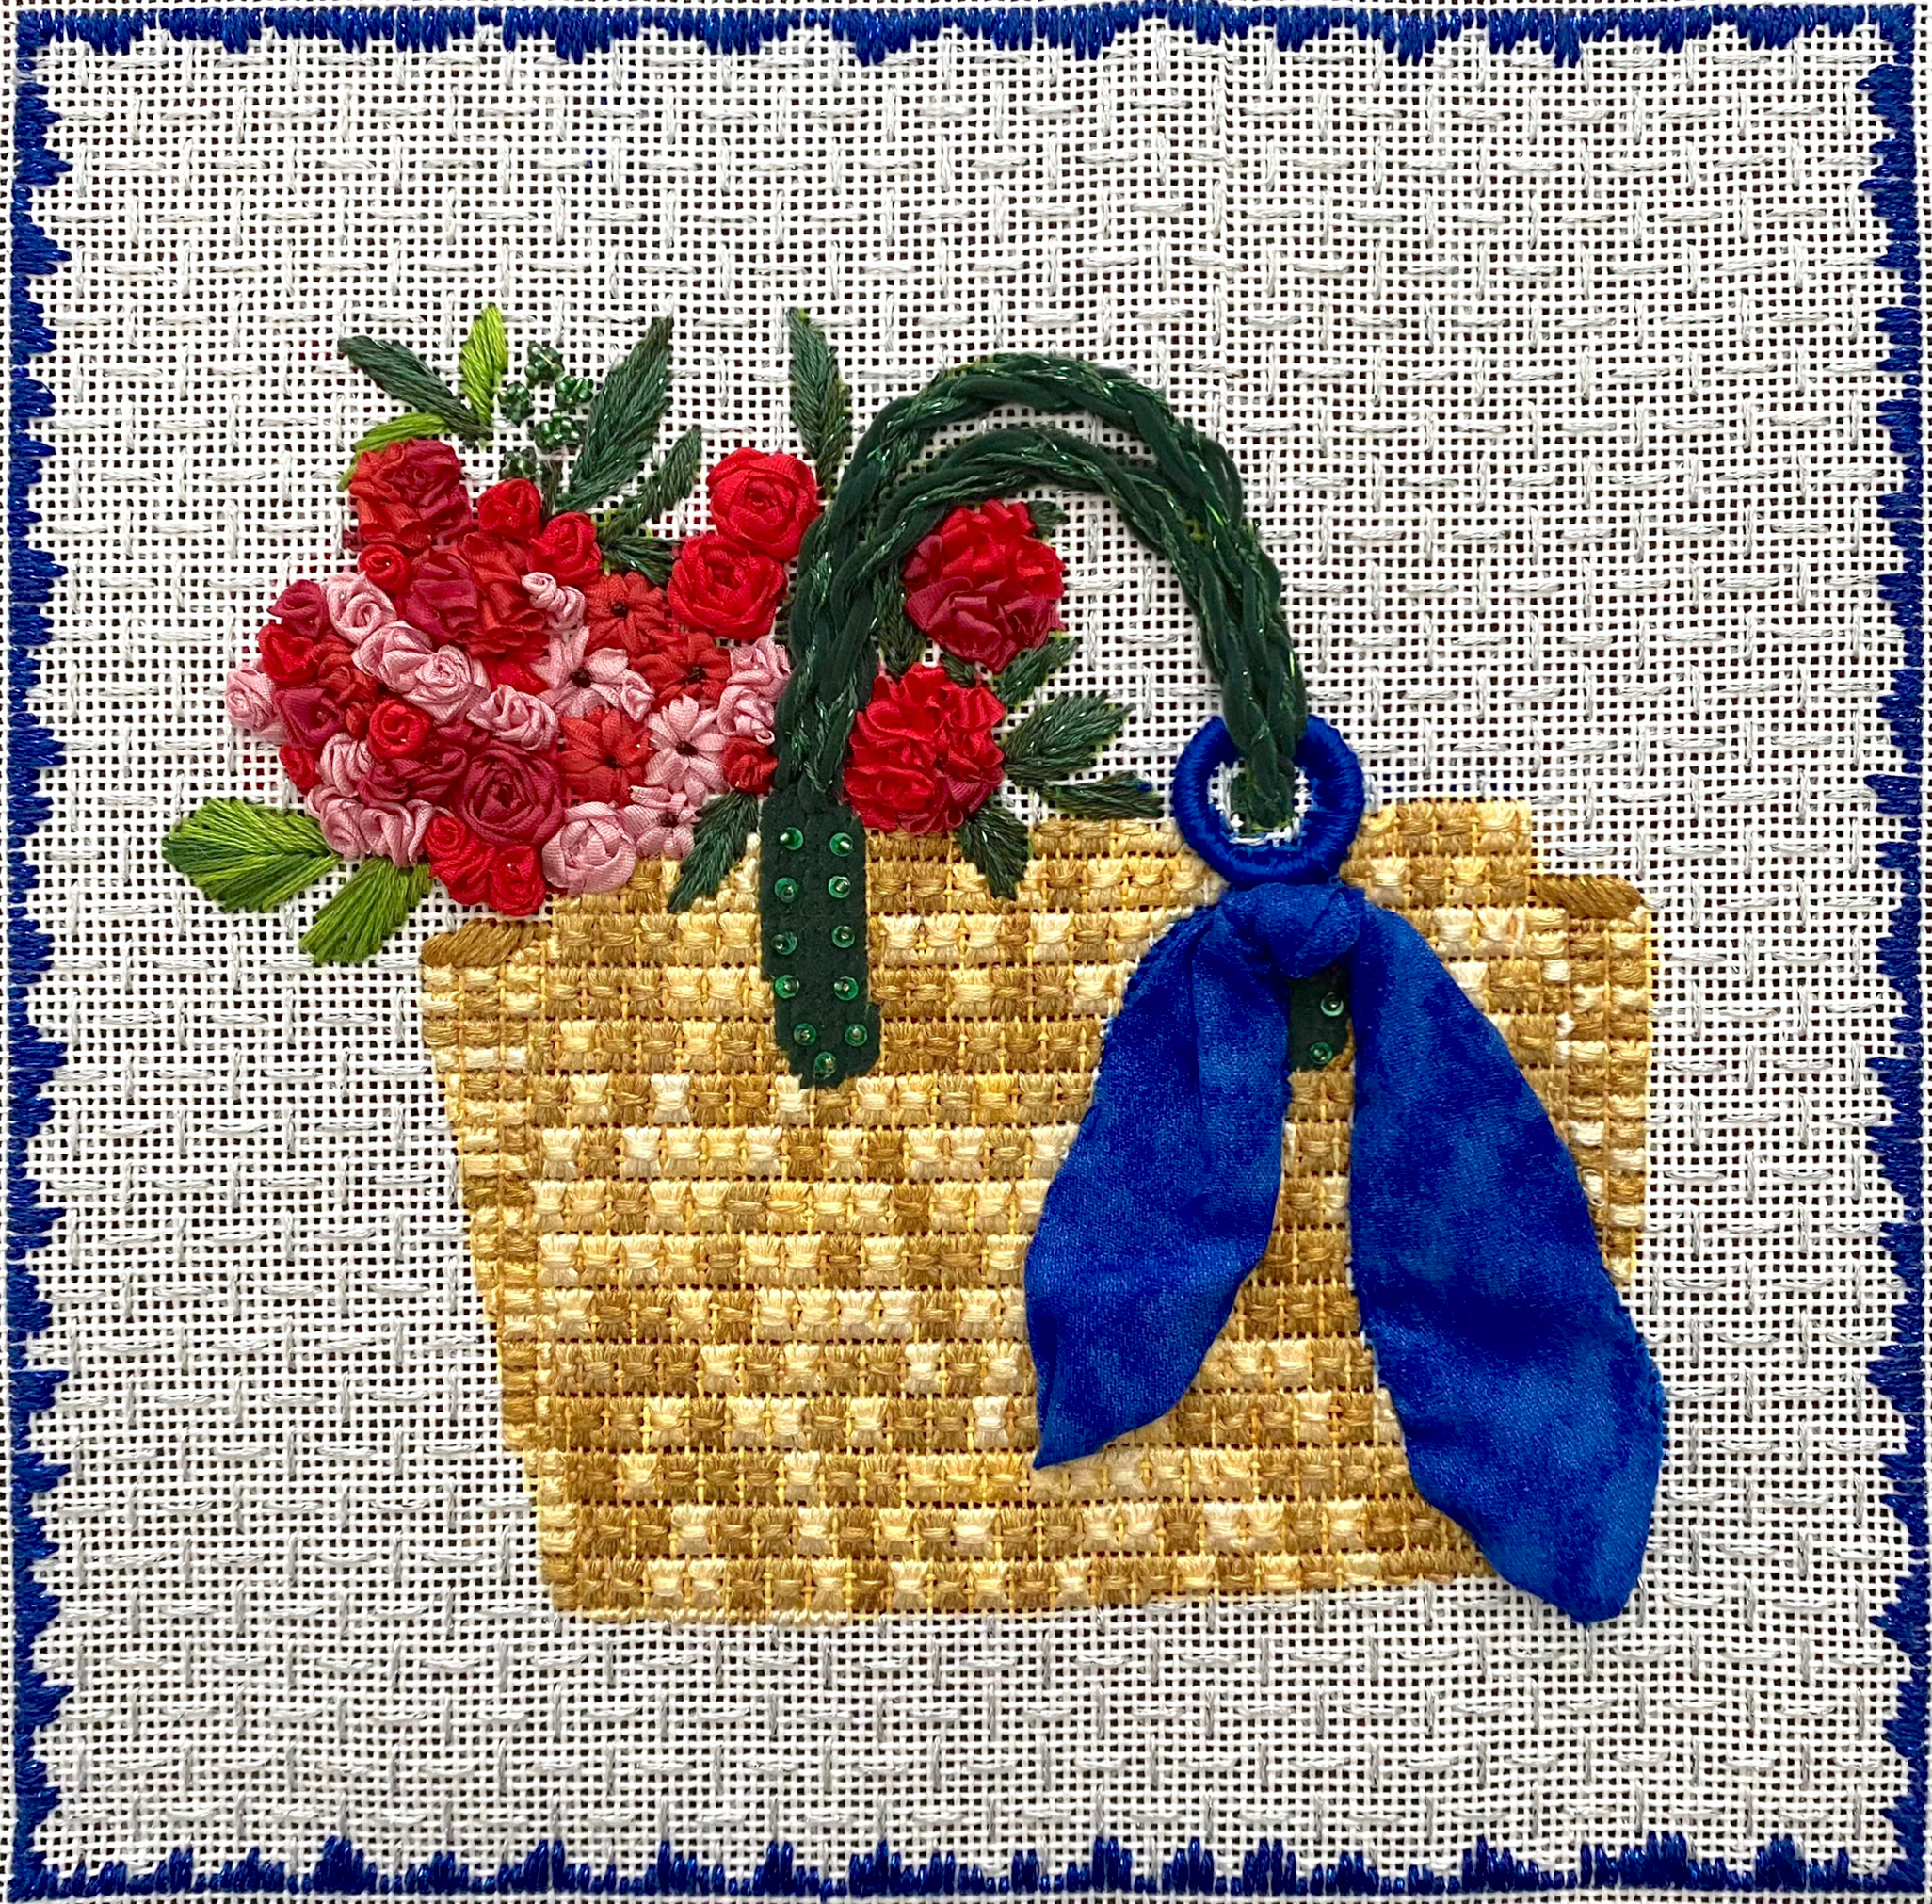 PO's Point — It's all about needlepoint! – Po's Needlepoint